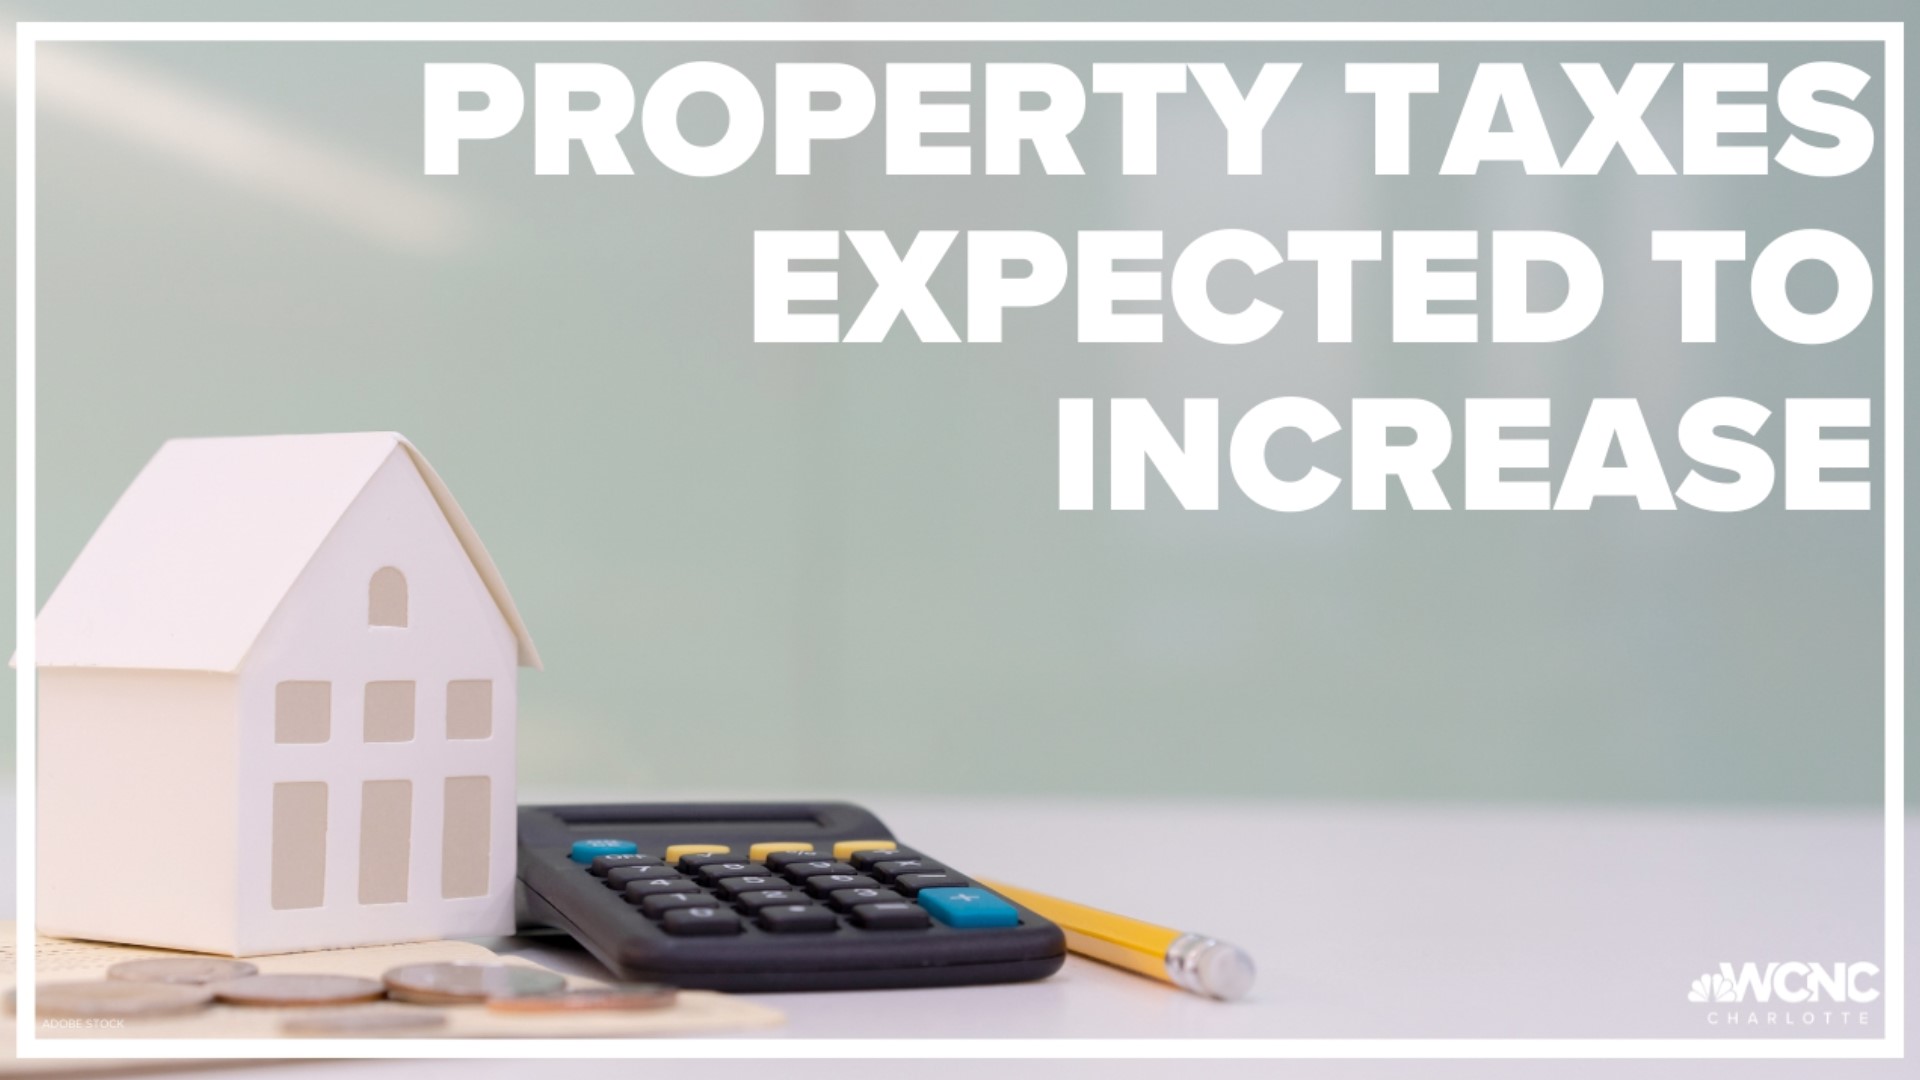 In just a few months, the Mecklenburg County Assessor's Office will lay out the new property taxes after revaluation.